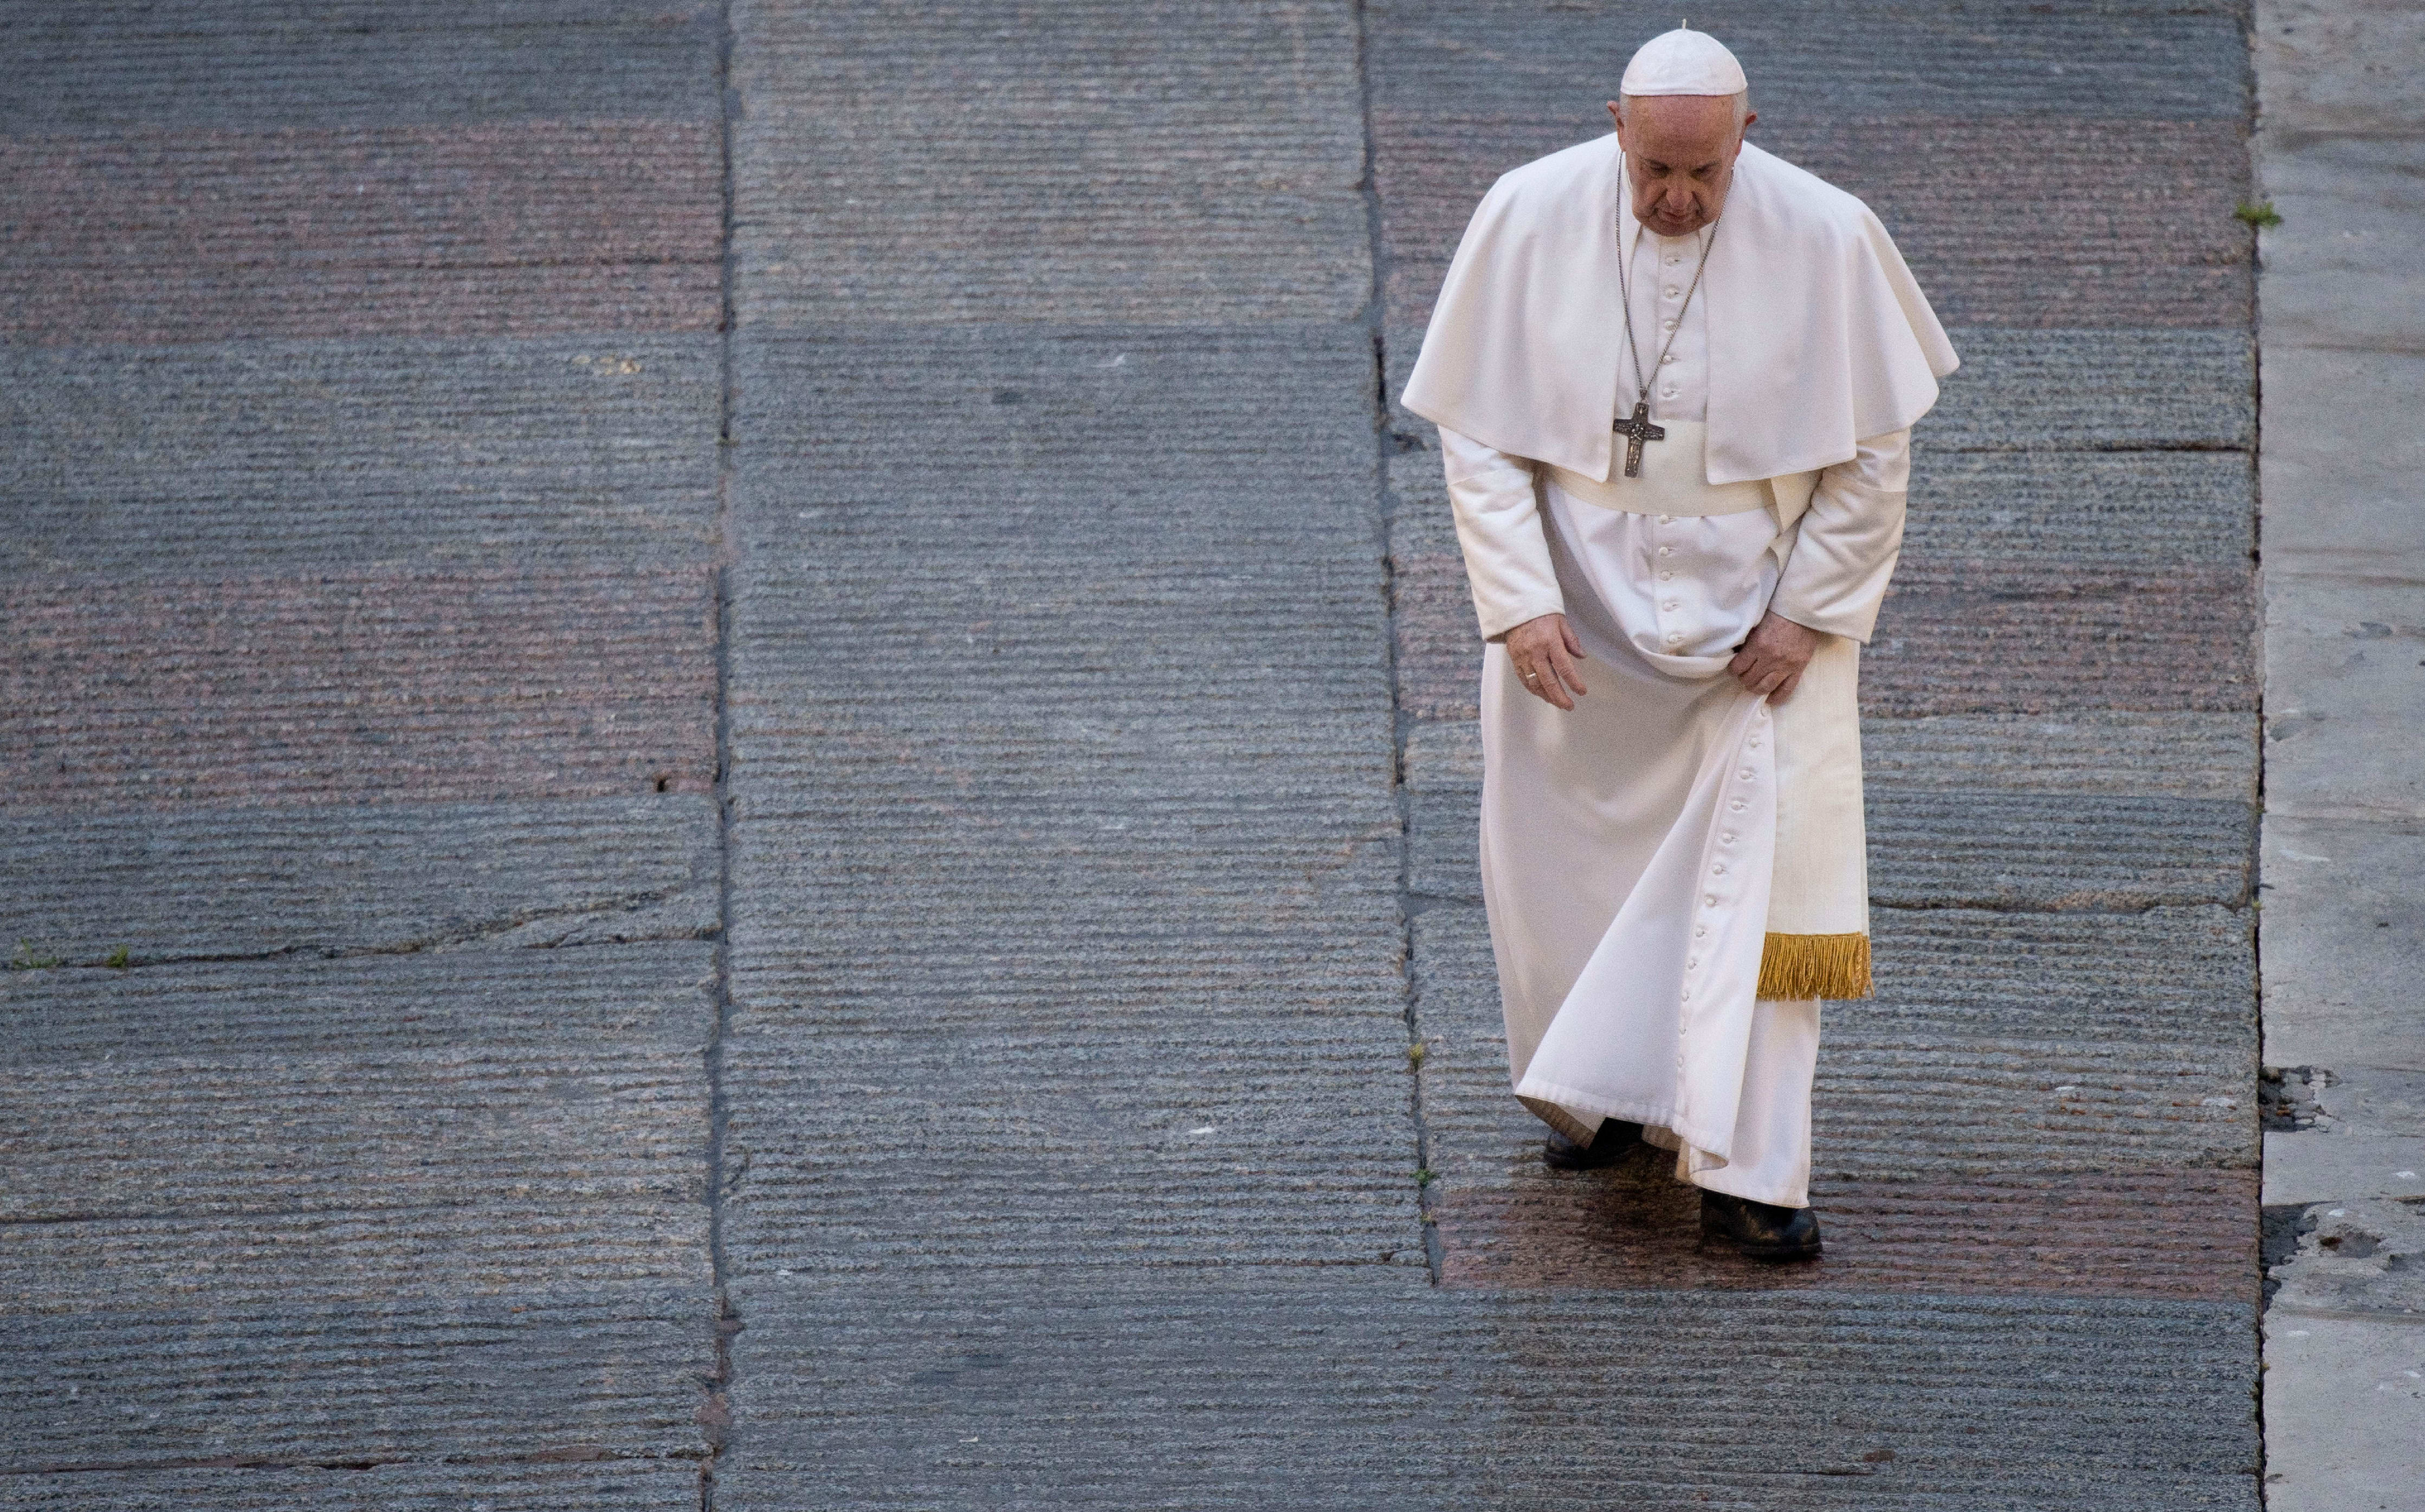 Pope Francis is the subject of a new documentary by award-winning filmmaker Evgeny Afineevsky.